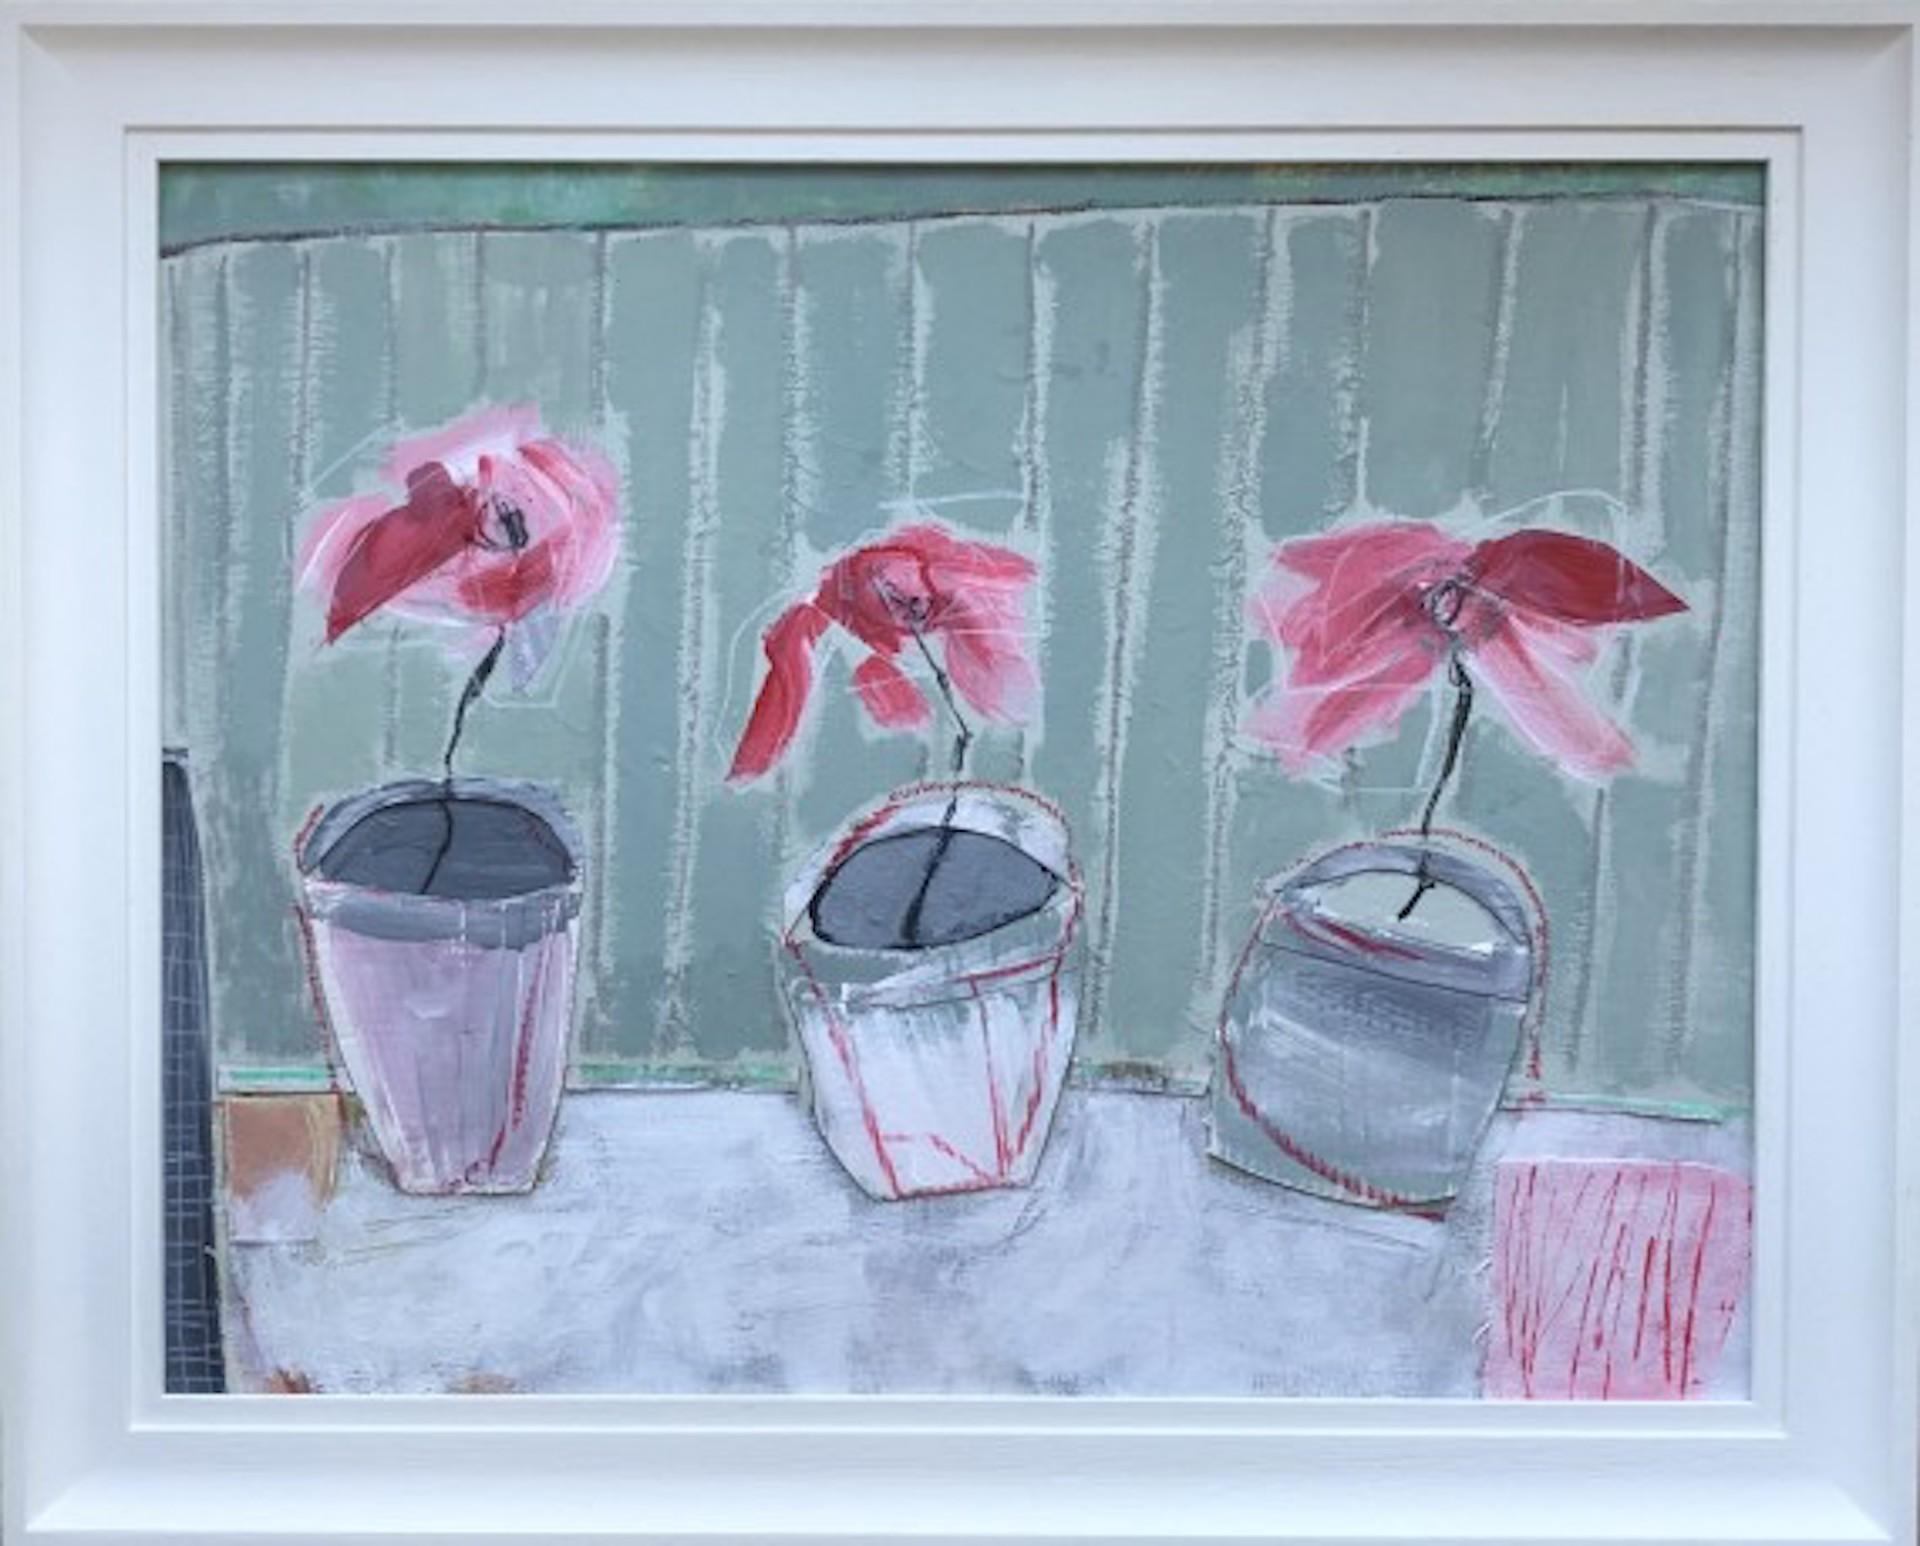 One Gathering is an original painting by Diana Forbes. The artwork is a reflection of time spent in lockdown and the wish to meet up with friends and family again. Socially distanced potted plants, ready to emerge into the world.
Diana Forbes is